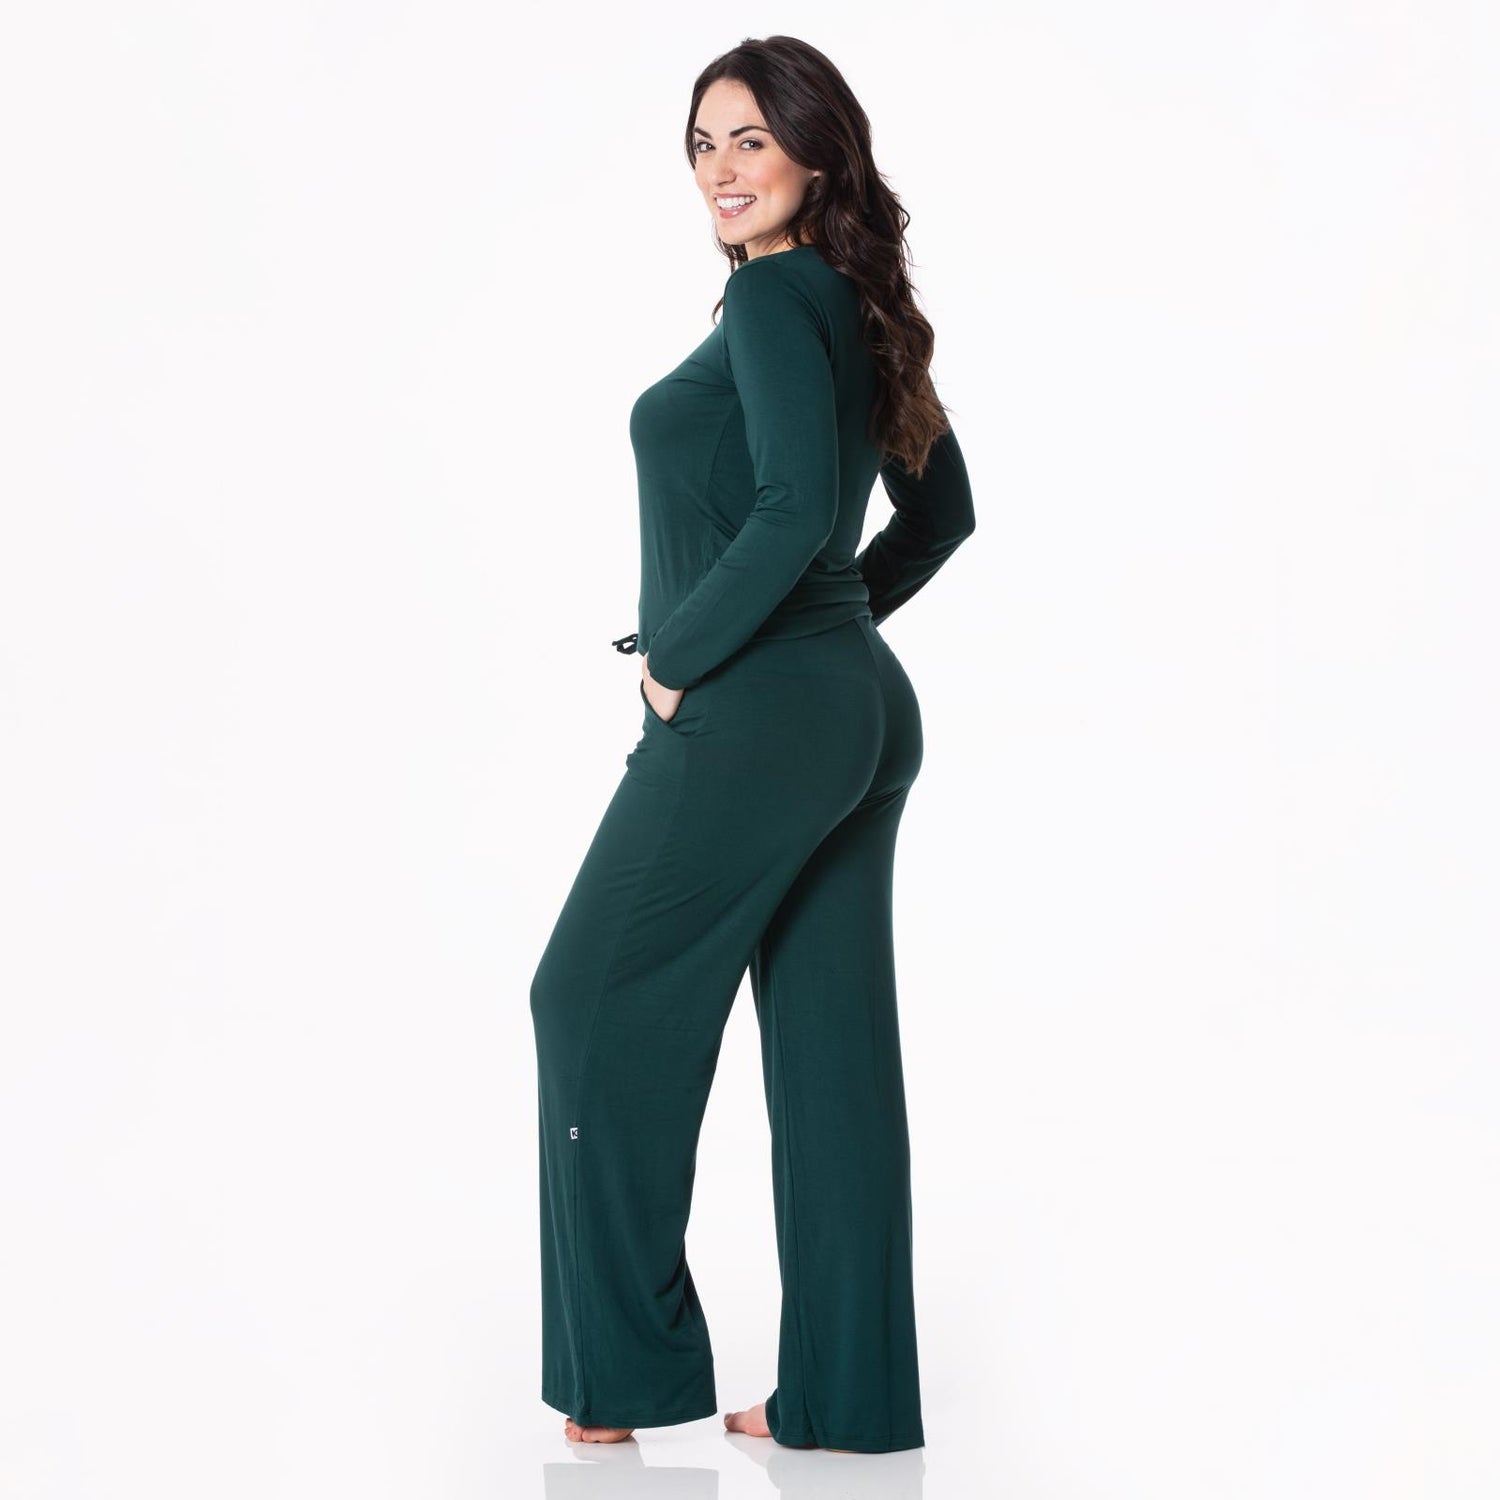 Women's Solid Lounge Pants in Pine